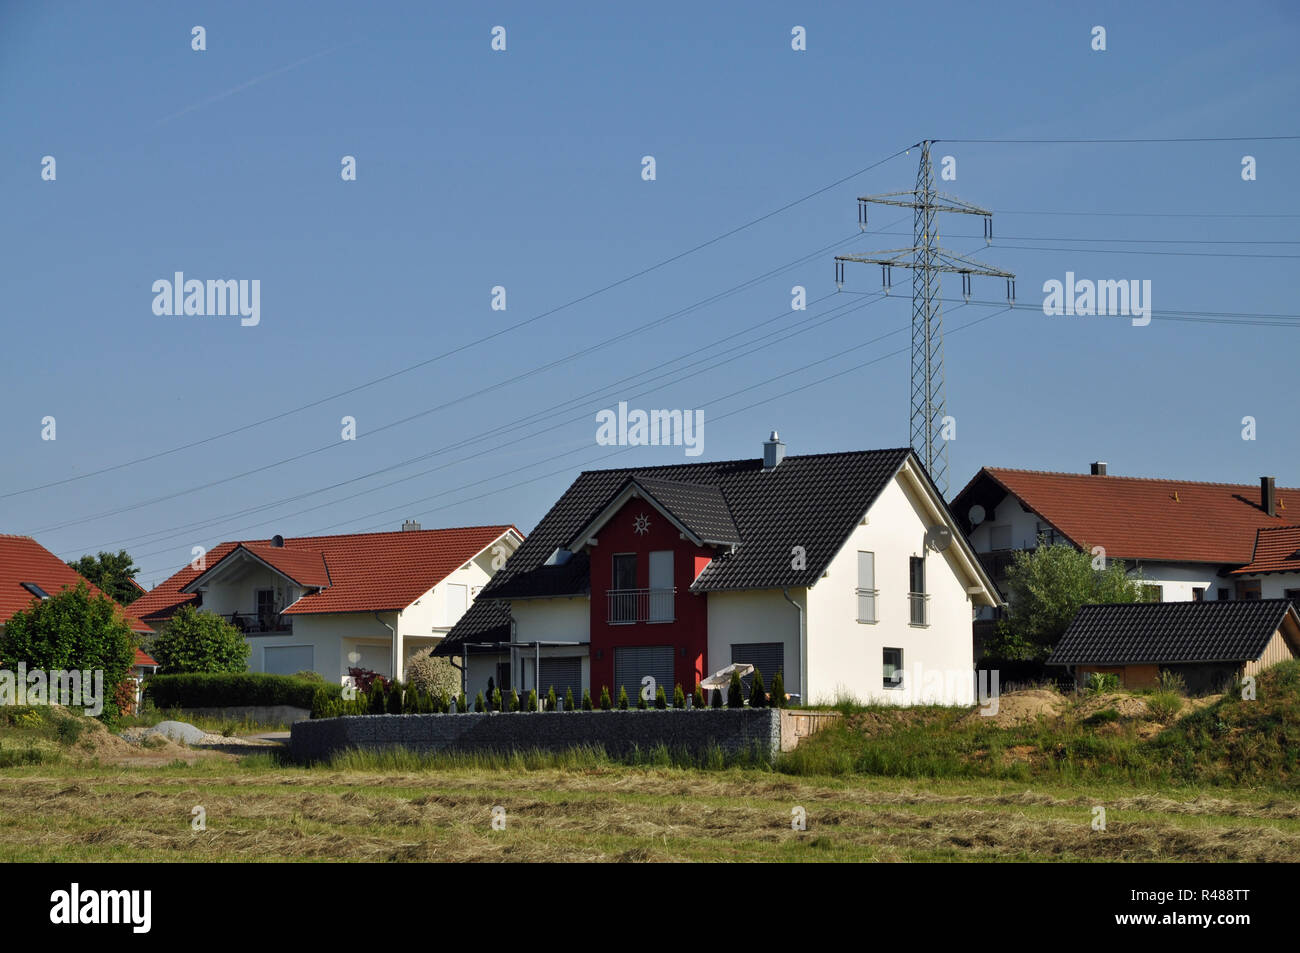 high voltage power line in residential area Stock Photo